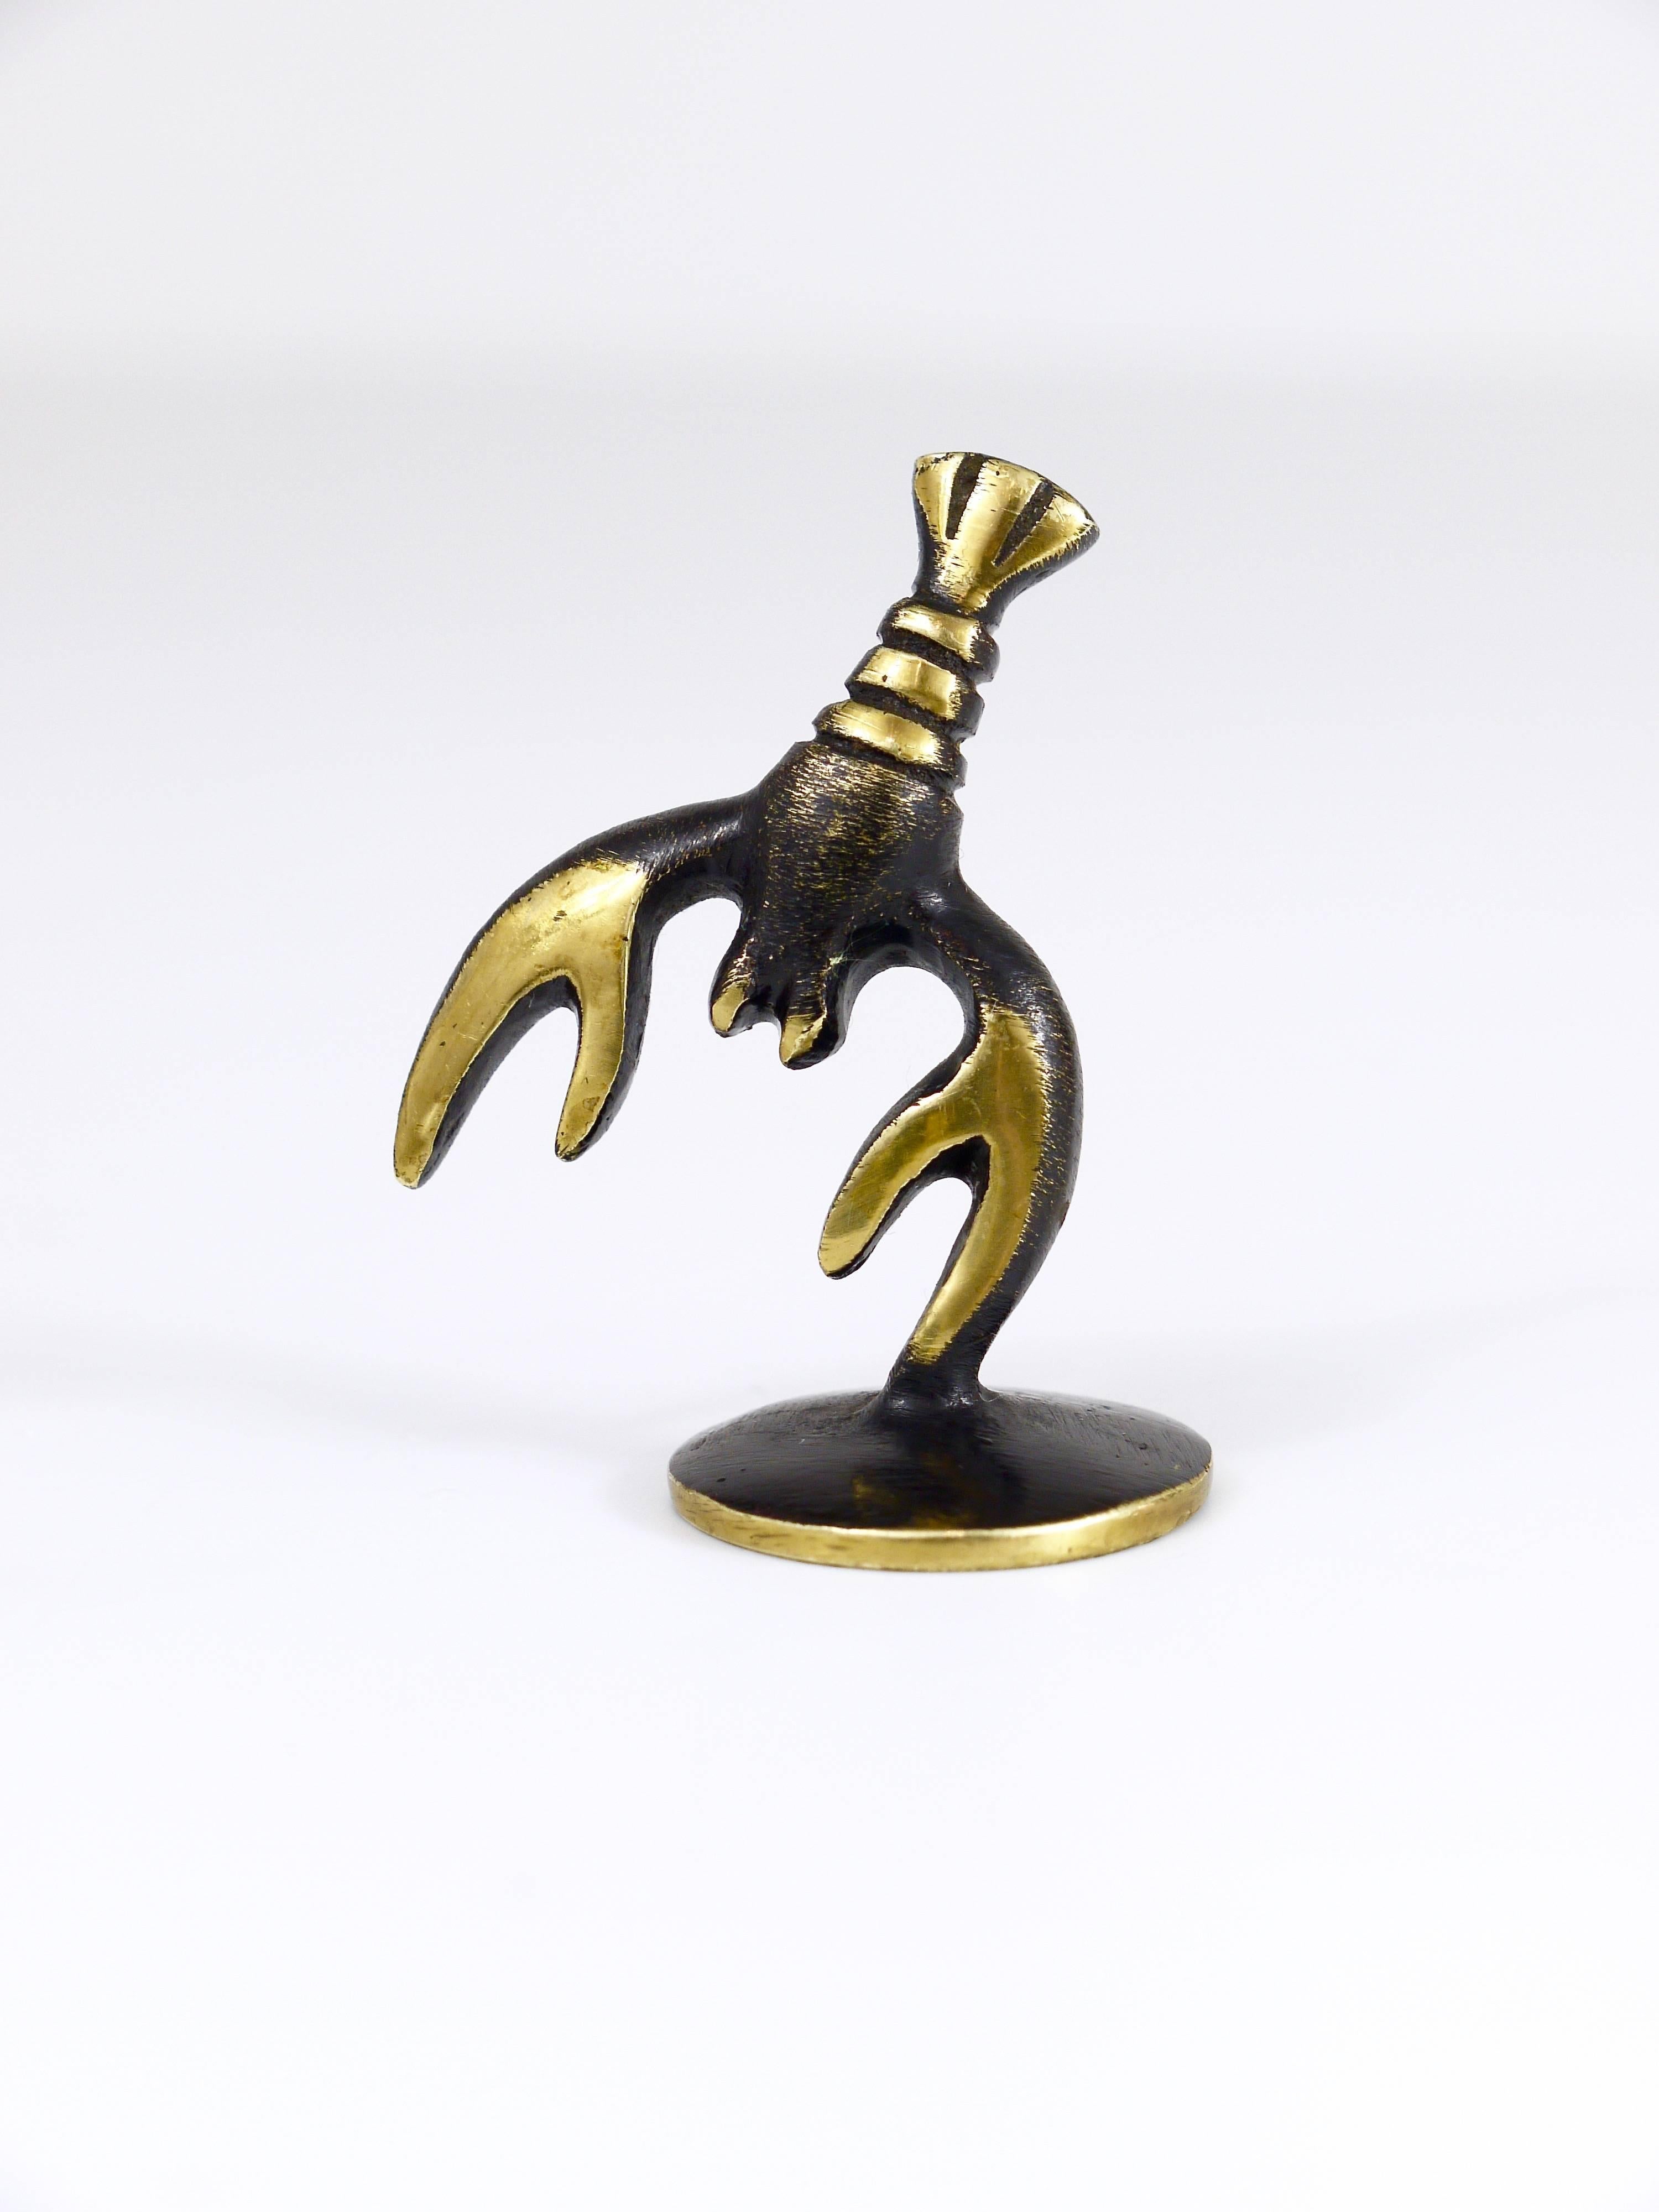 A beautiful Cancer figurine, made of brass, designed by Walter Bosse, executed by Hertha Baller, Austria, in the 1950s. In excellent condition.